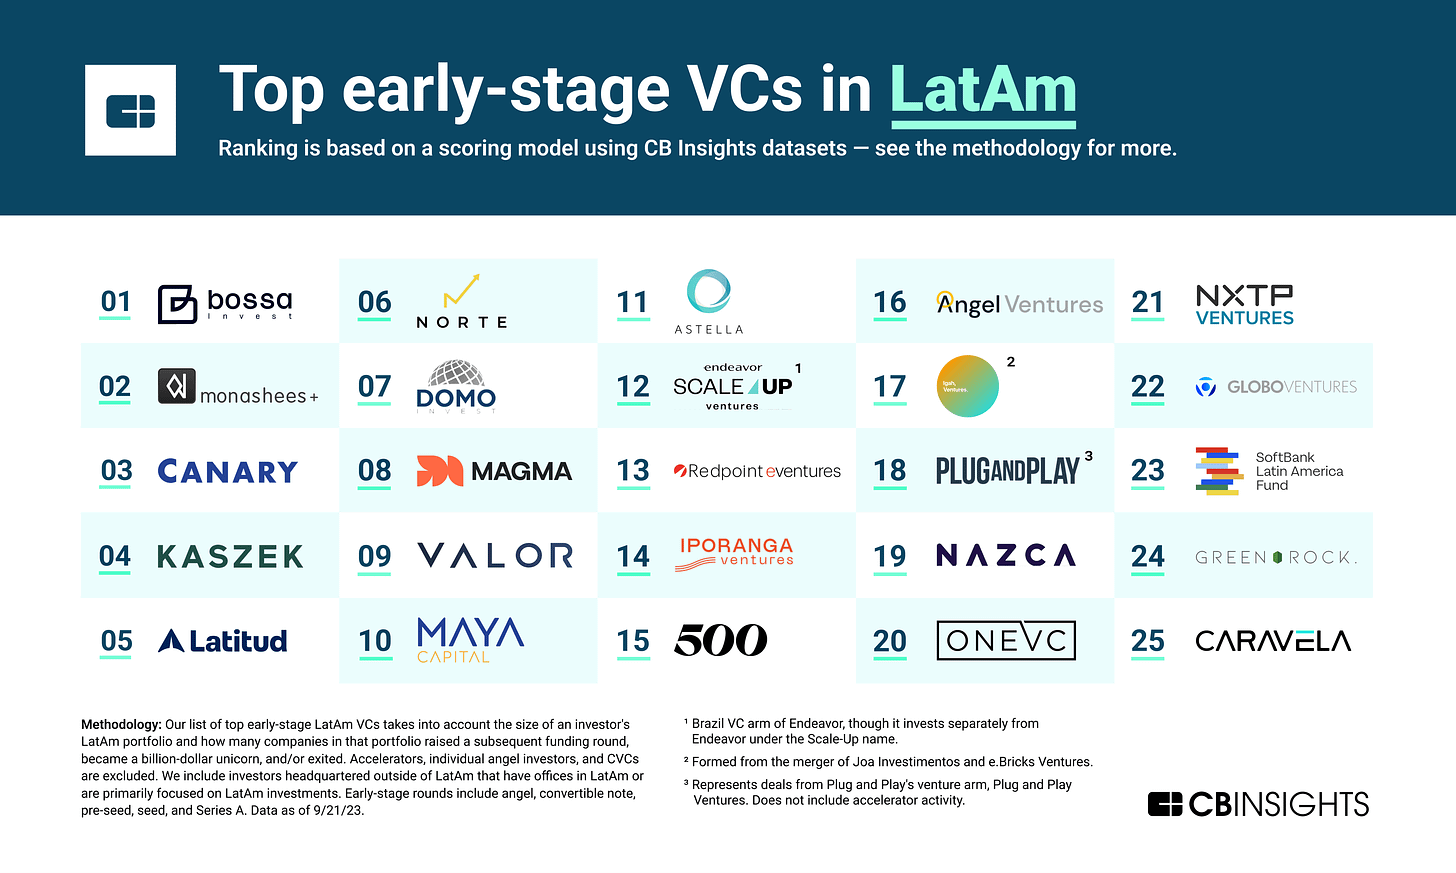 A ranking of the top 25 early-stage VCs in LatAm